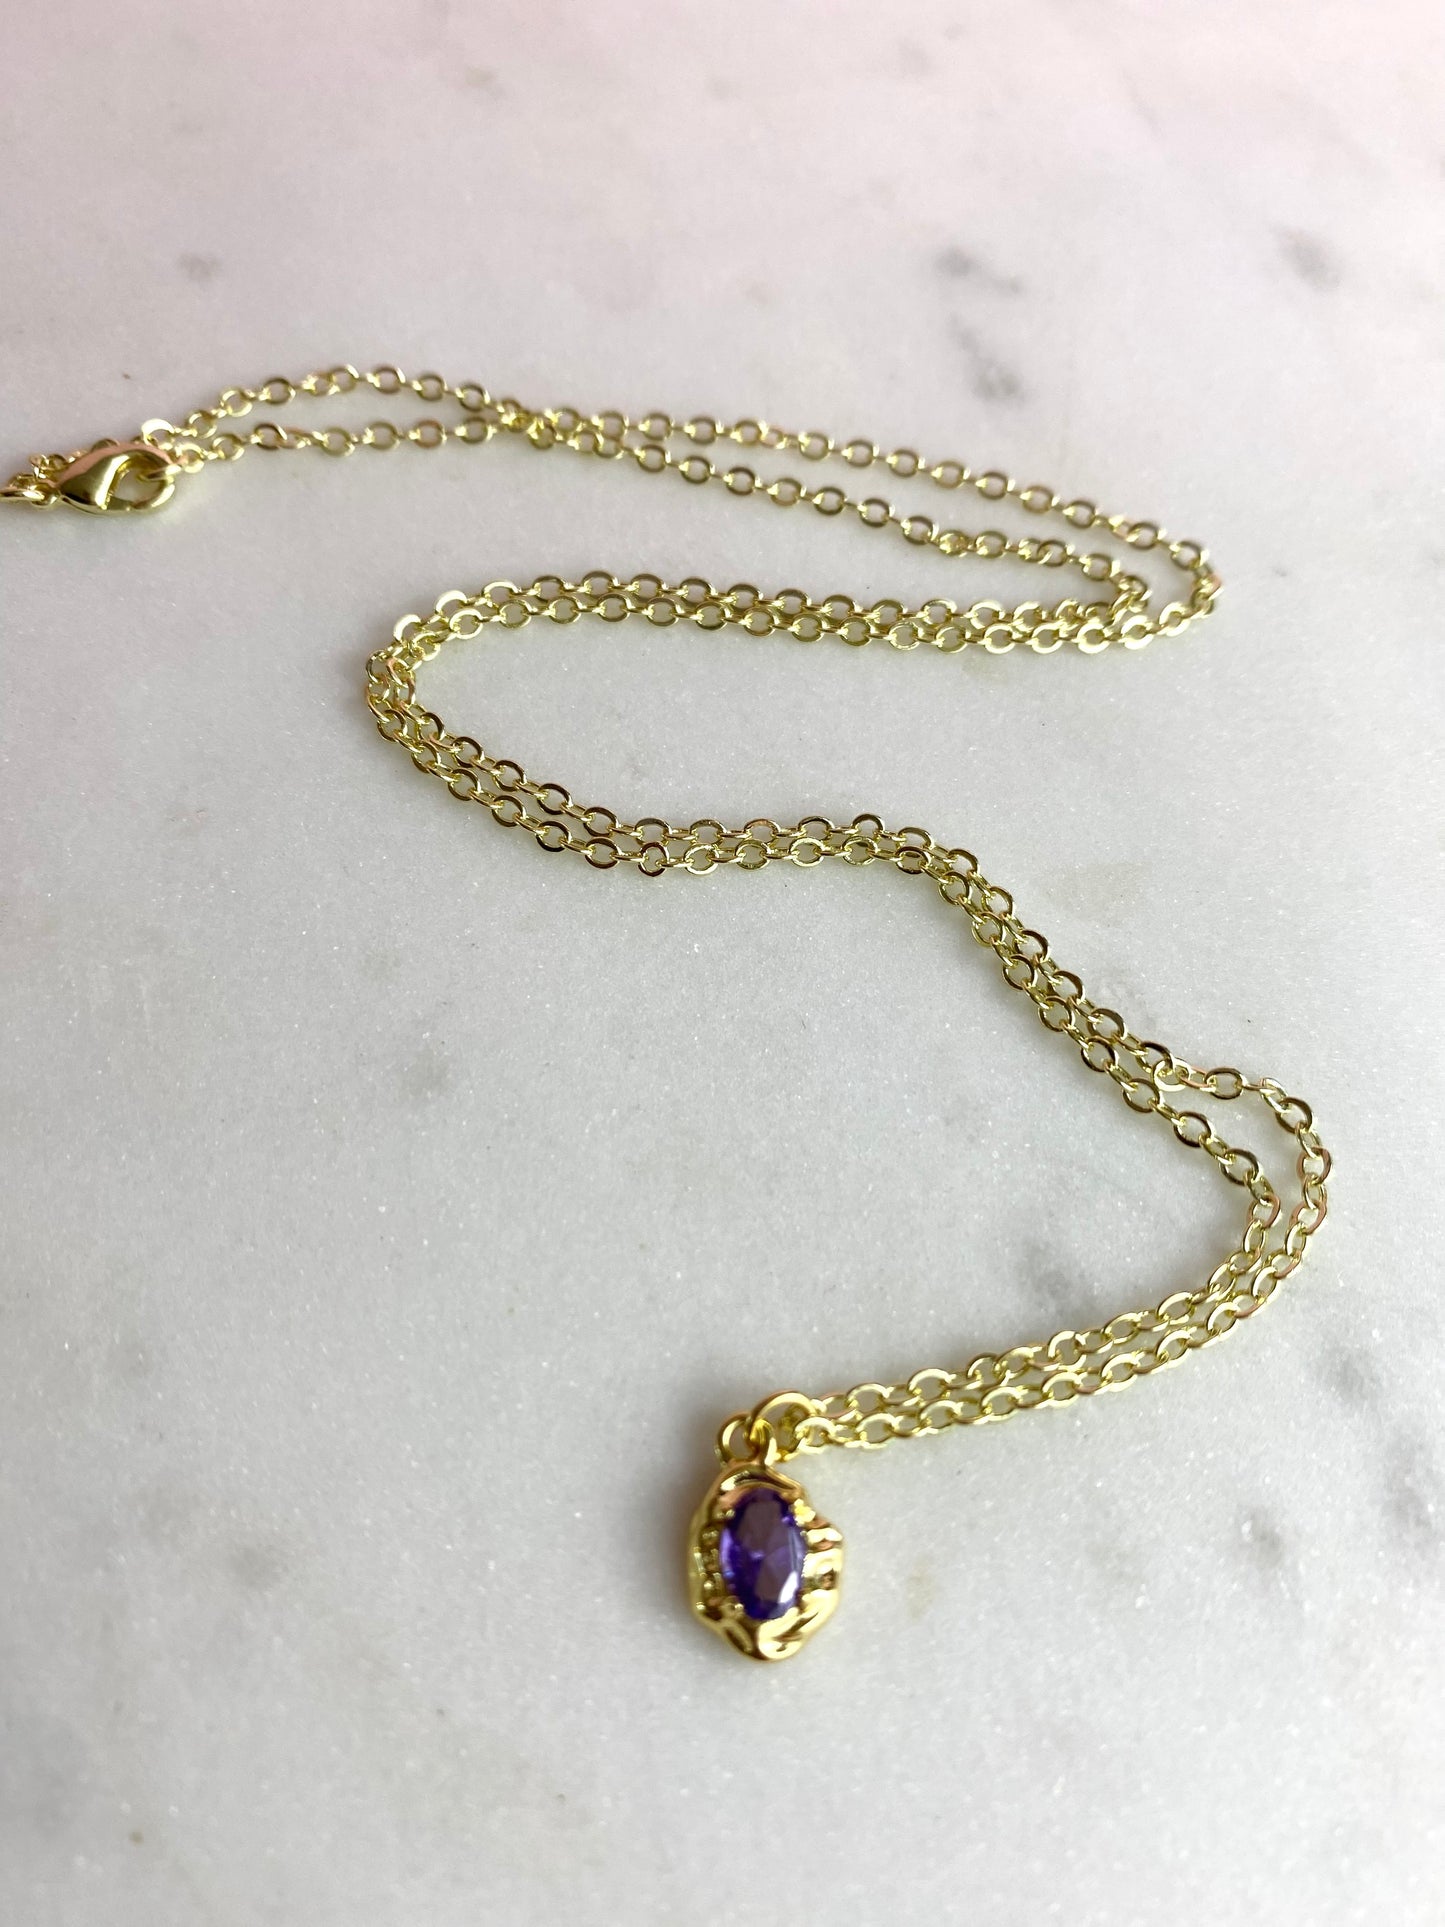 Dainty Gold-Plated Amethyst CZ Oval Necklace | Handmade Jewelry